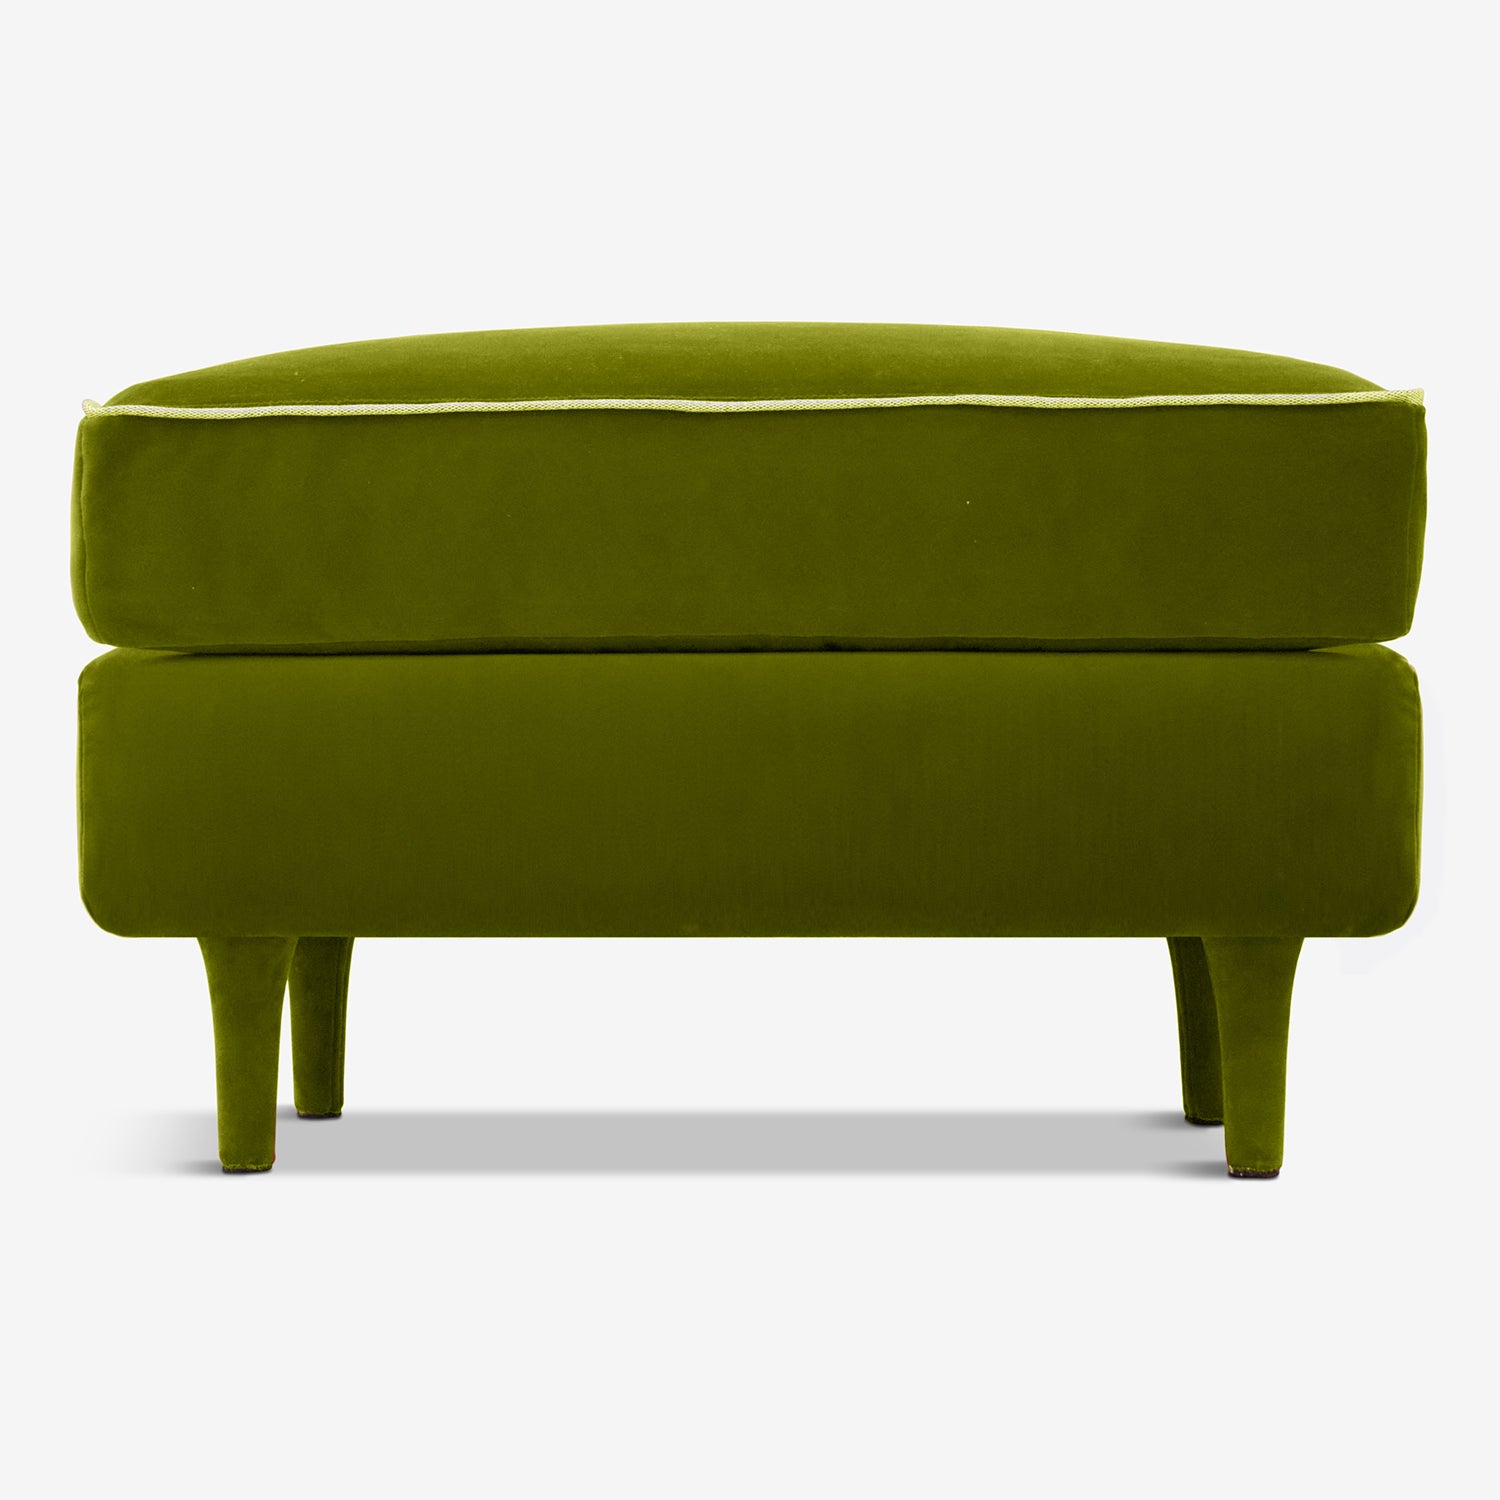 Sustainable Compact Pouf - green vlevet